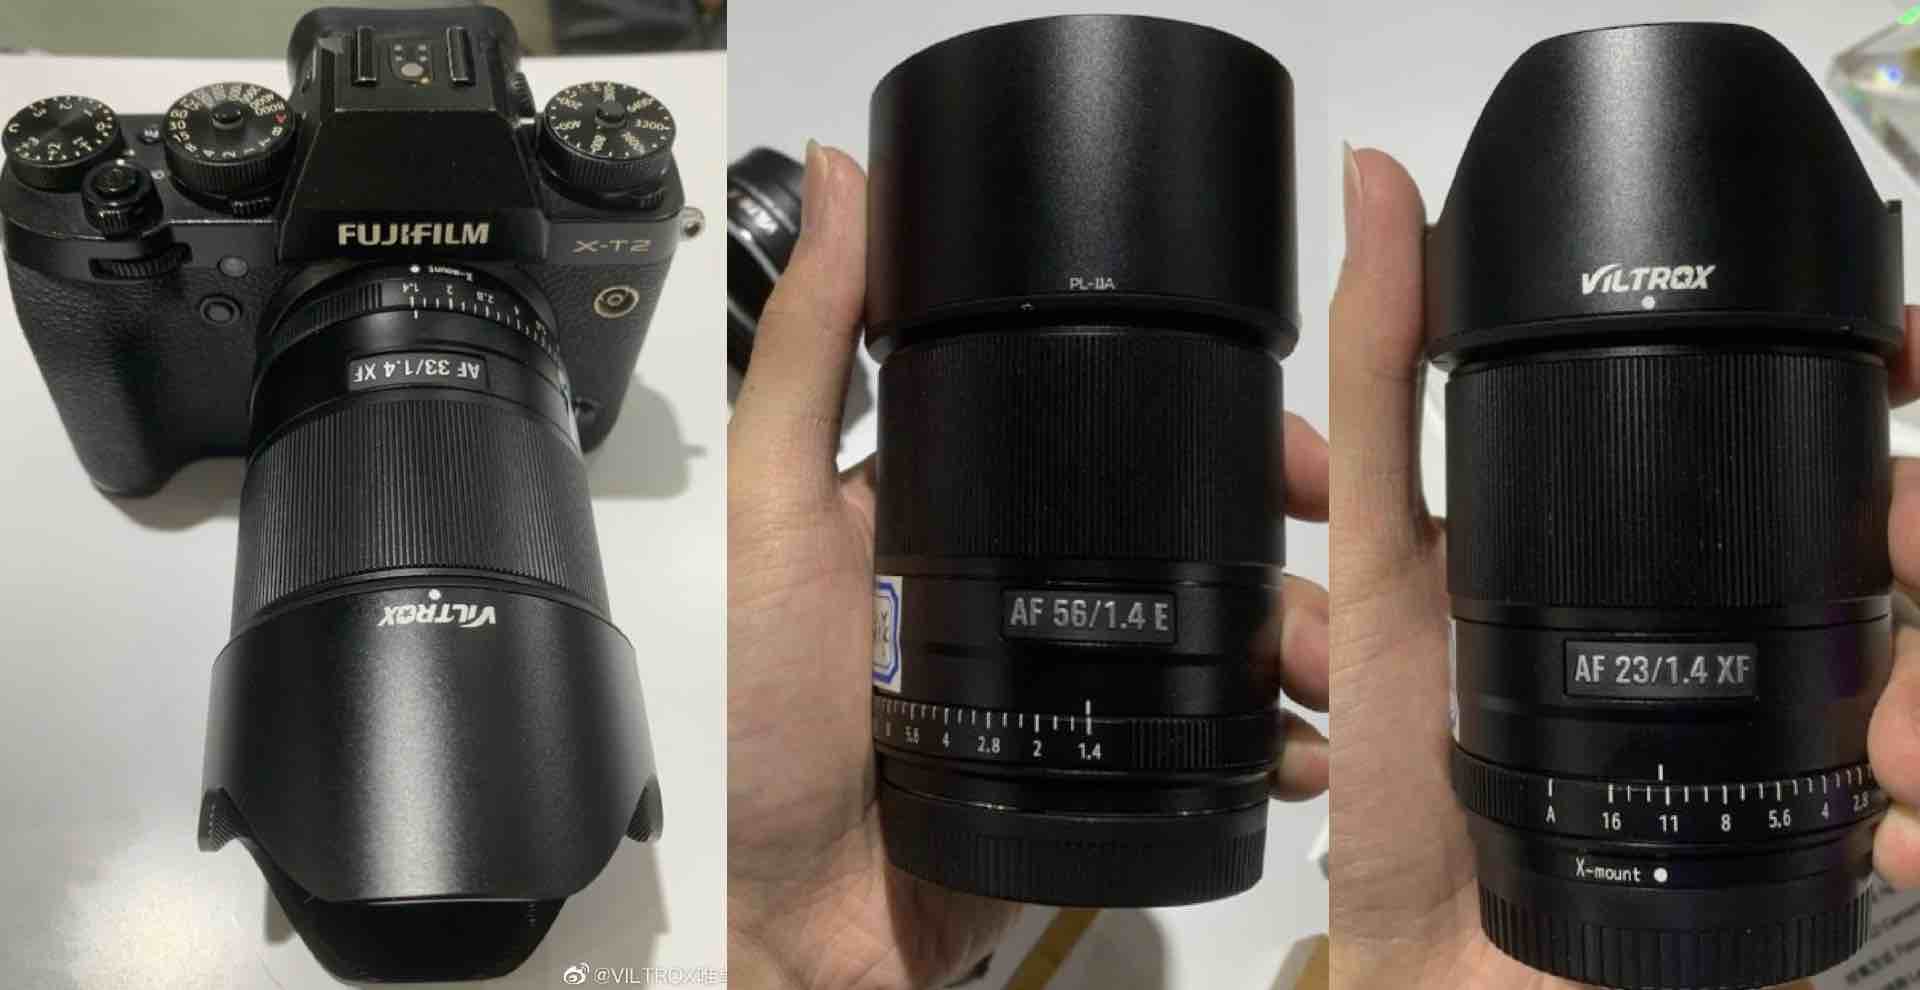 NEW Images of Viltrox 23mm f/1.4, 33mm f/1.4 and 56mm f/1.4